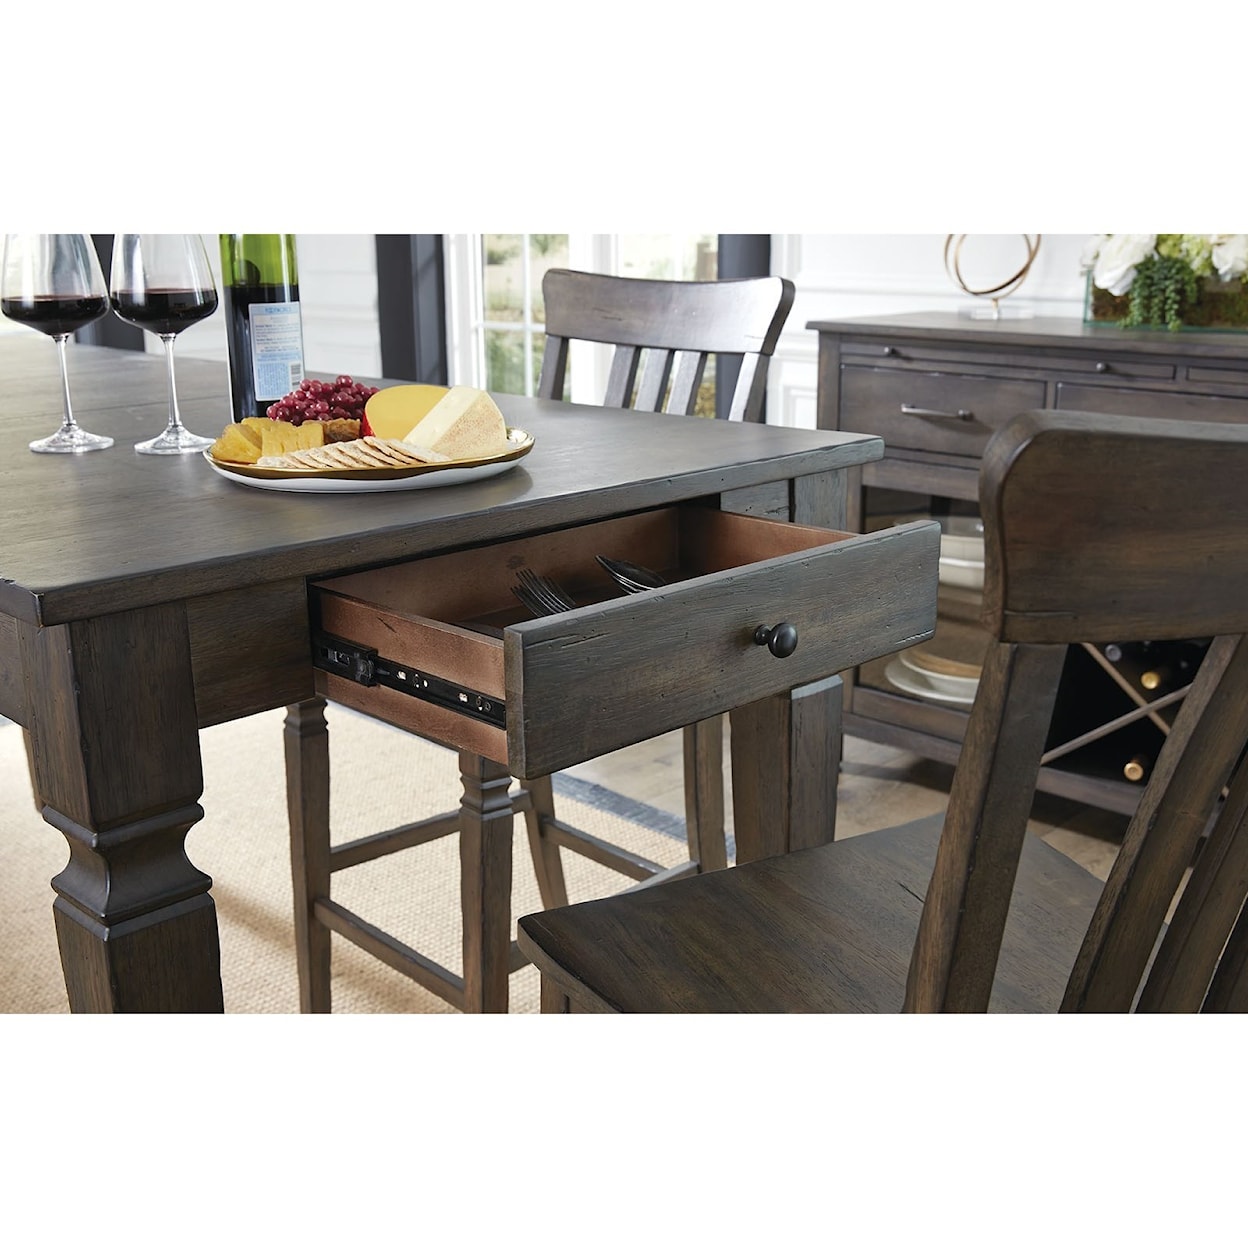 AAmerica Kingston 5-Piece Counter Height Table Set